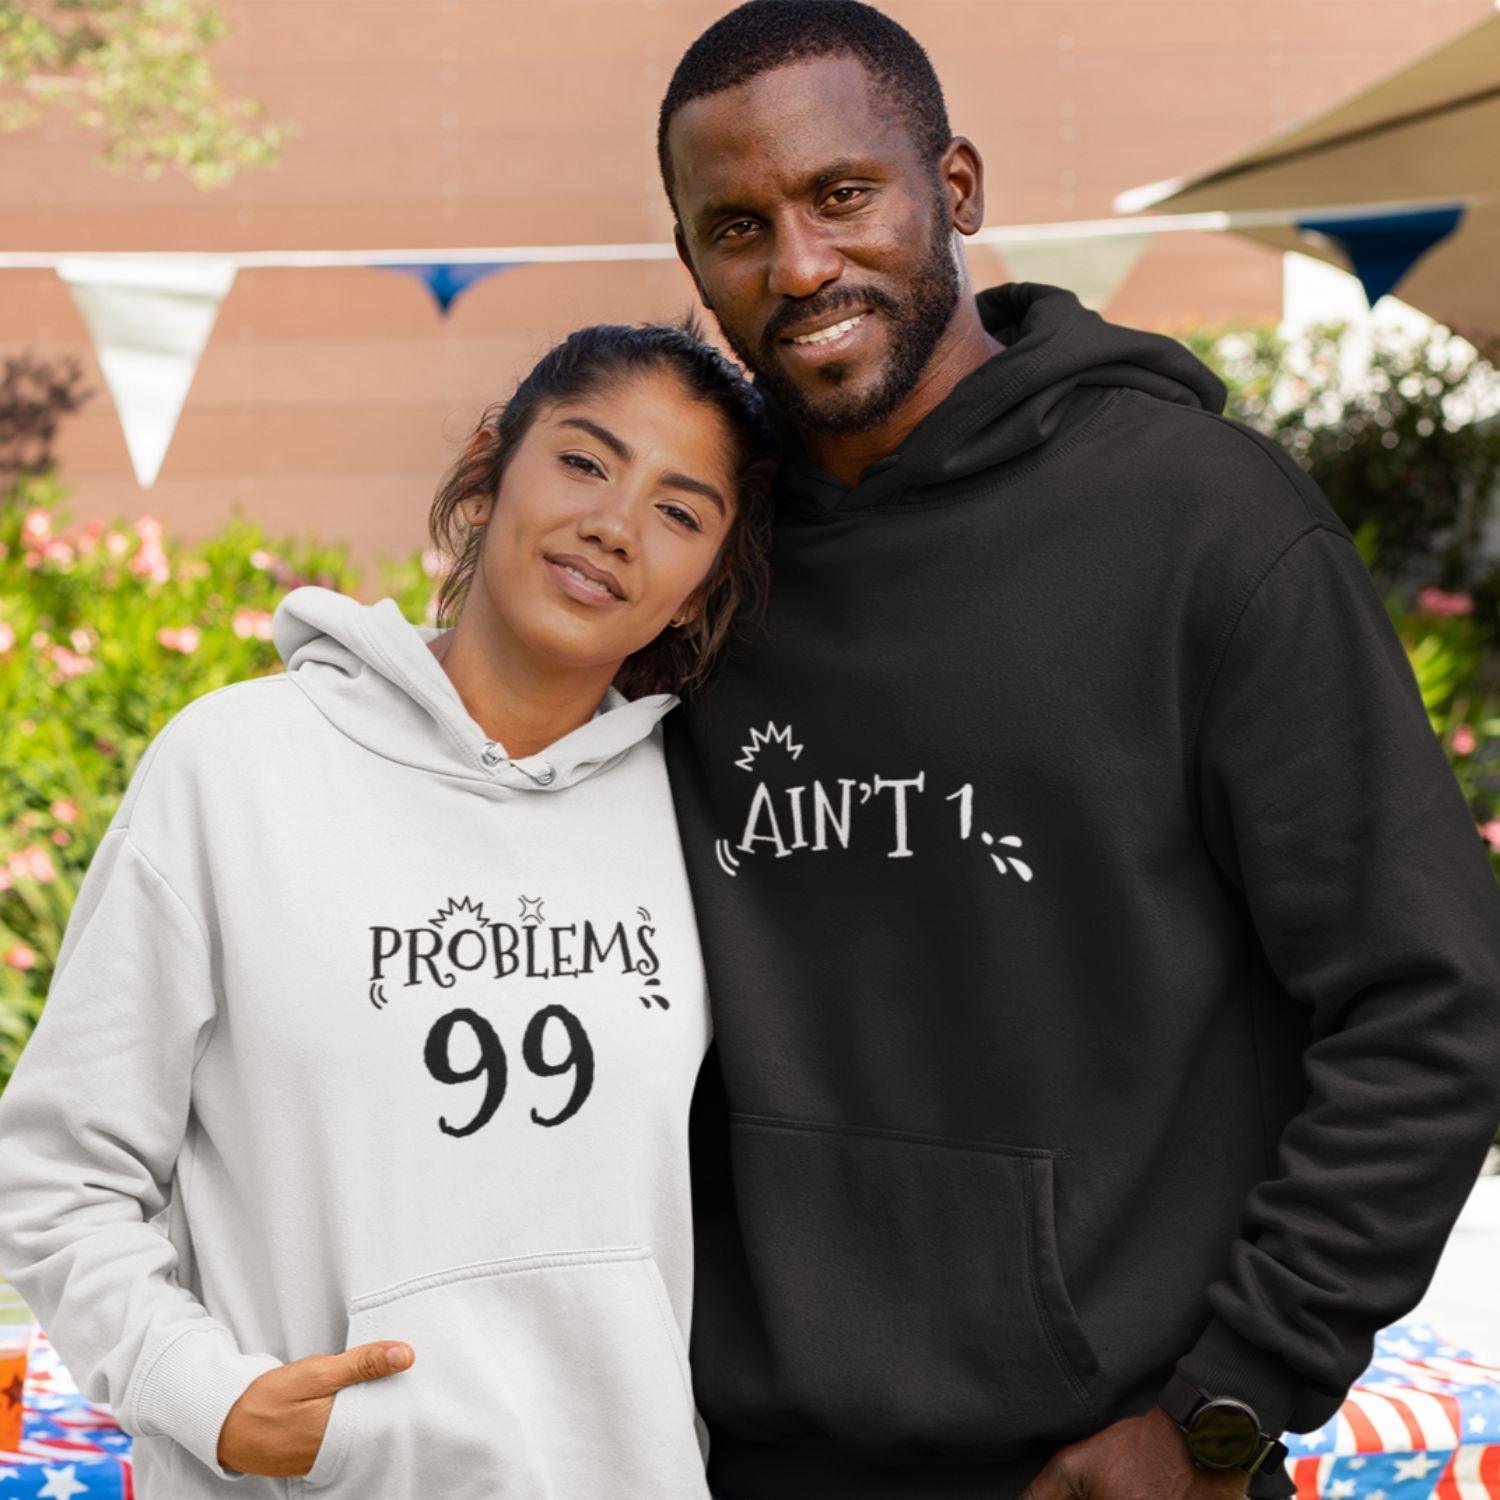 Matching Set Gifts for Couples: 99 Problems/Ain't 1 Hoodie & Sweatshirts,  Longsleeve Shirts